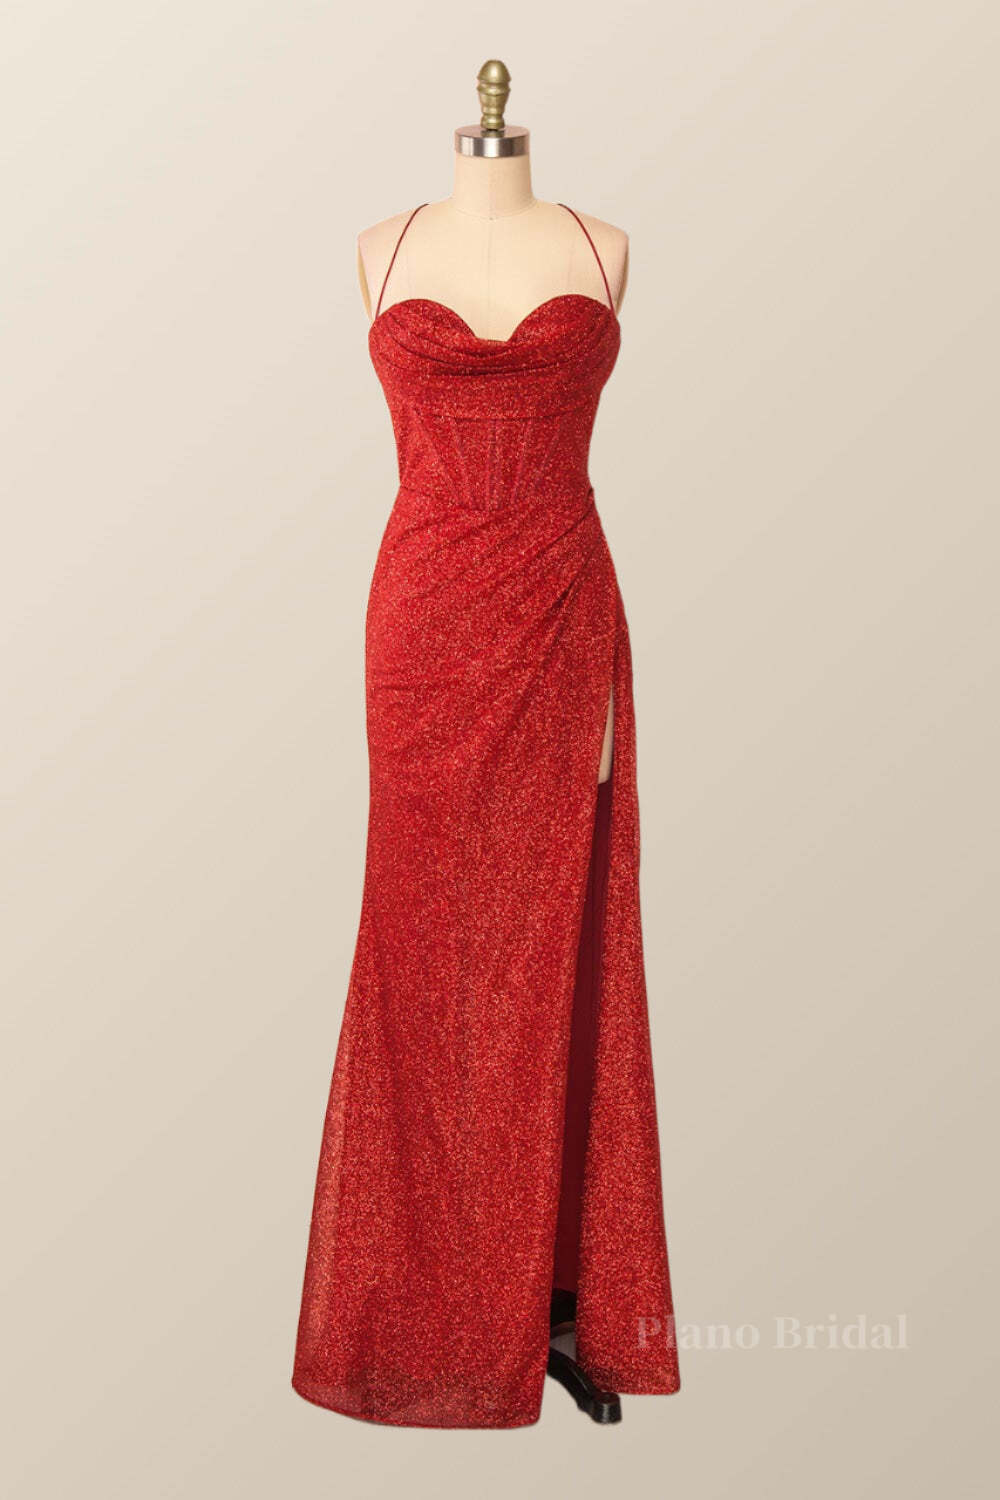 Fitted Red Cowl Neck Long Party Dress with Slit